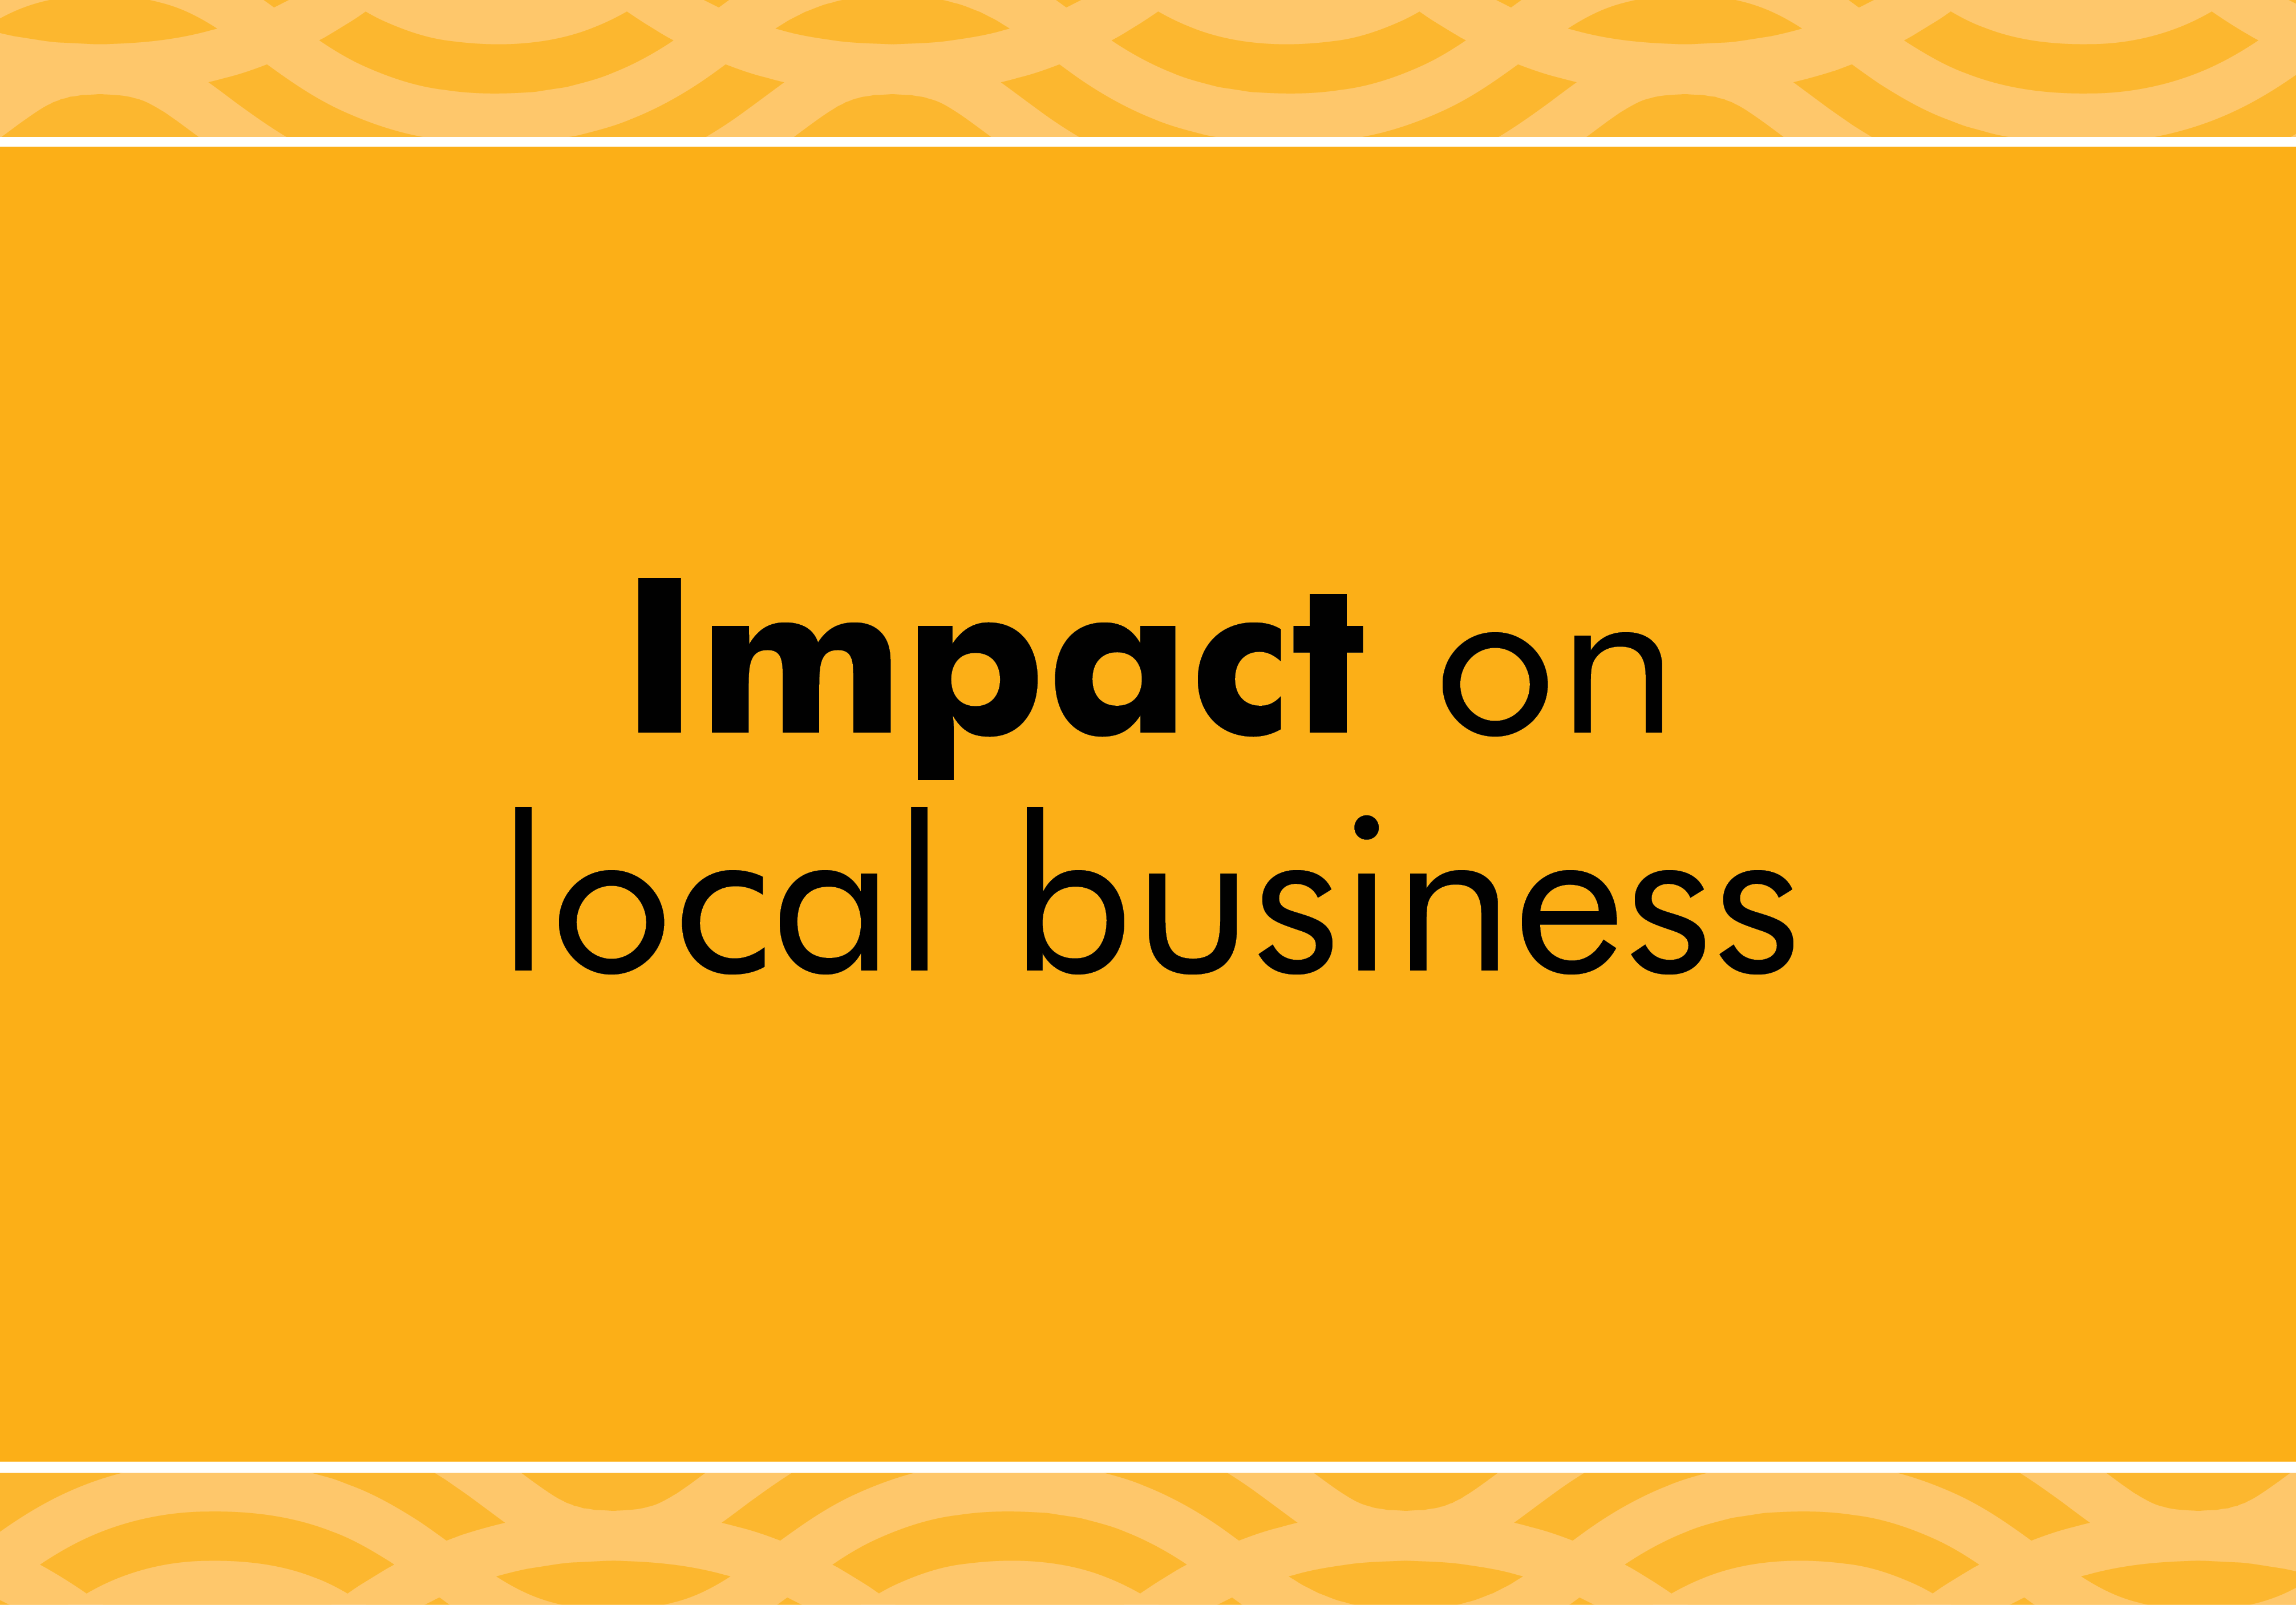 Impact on local business